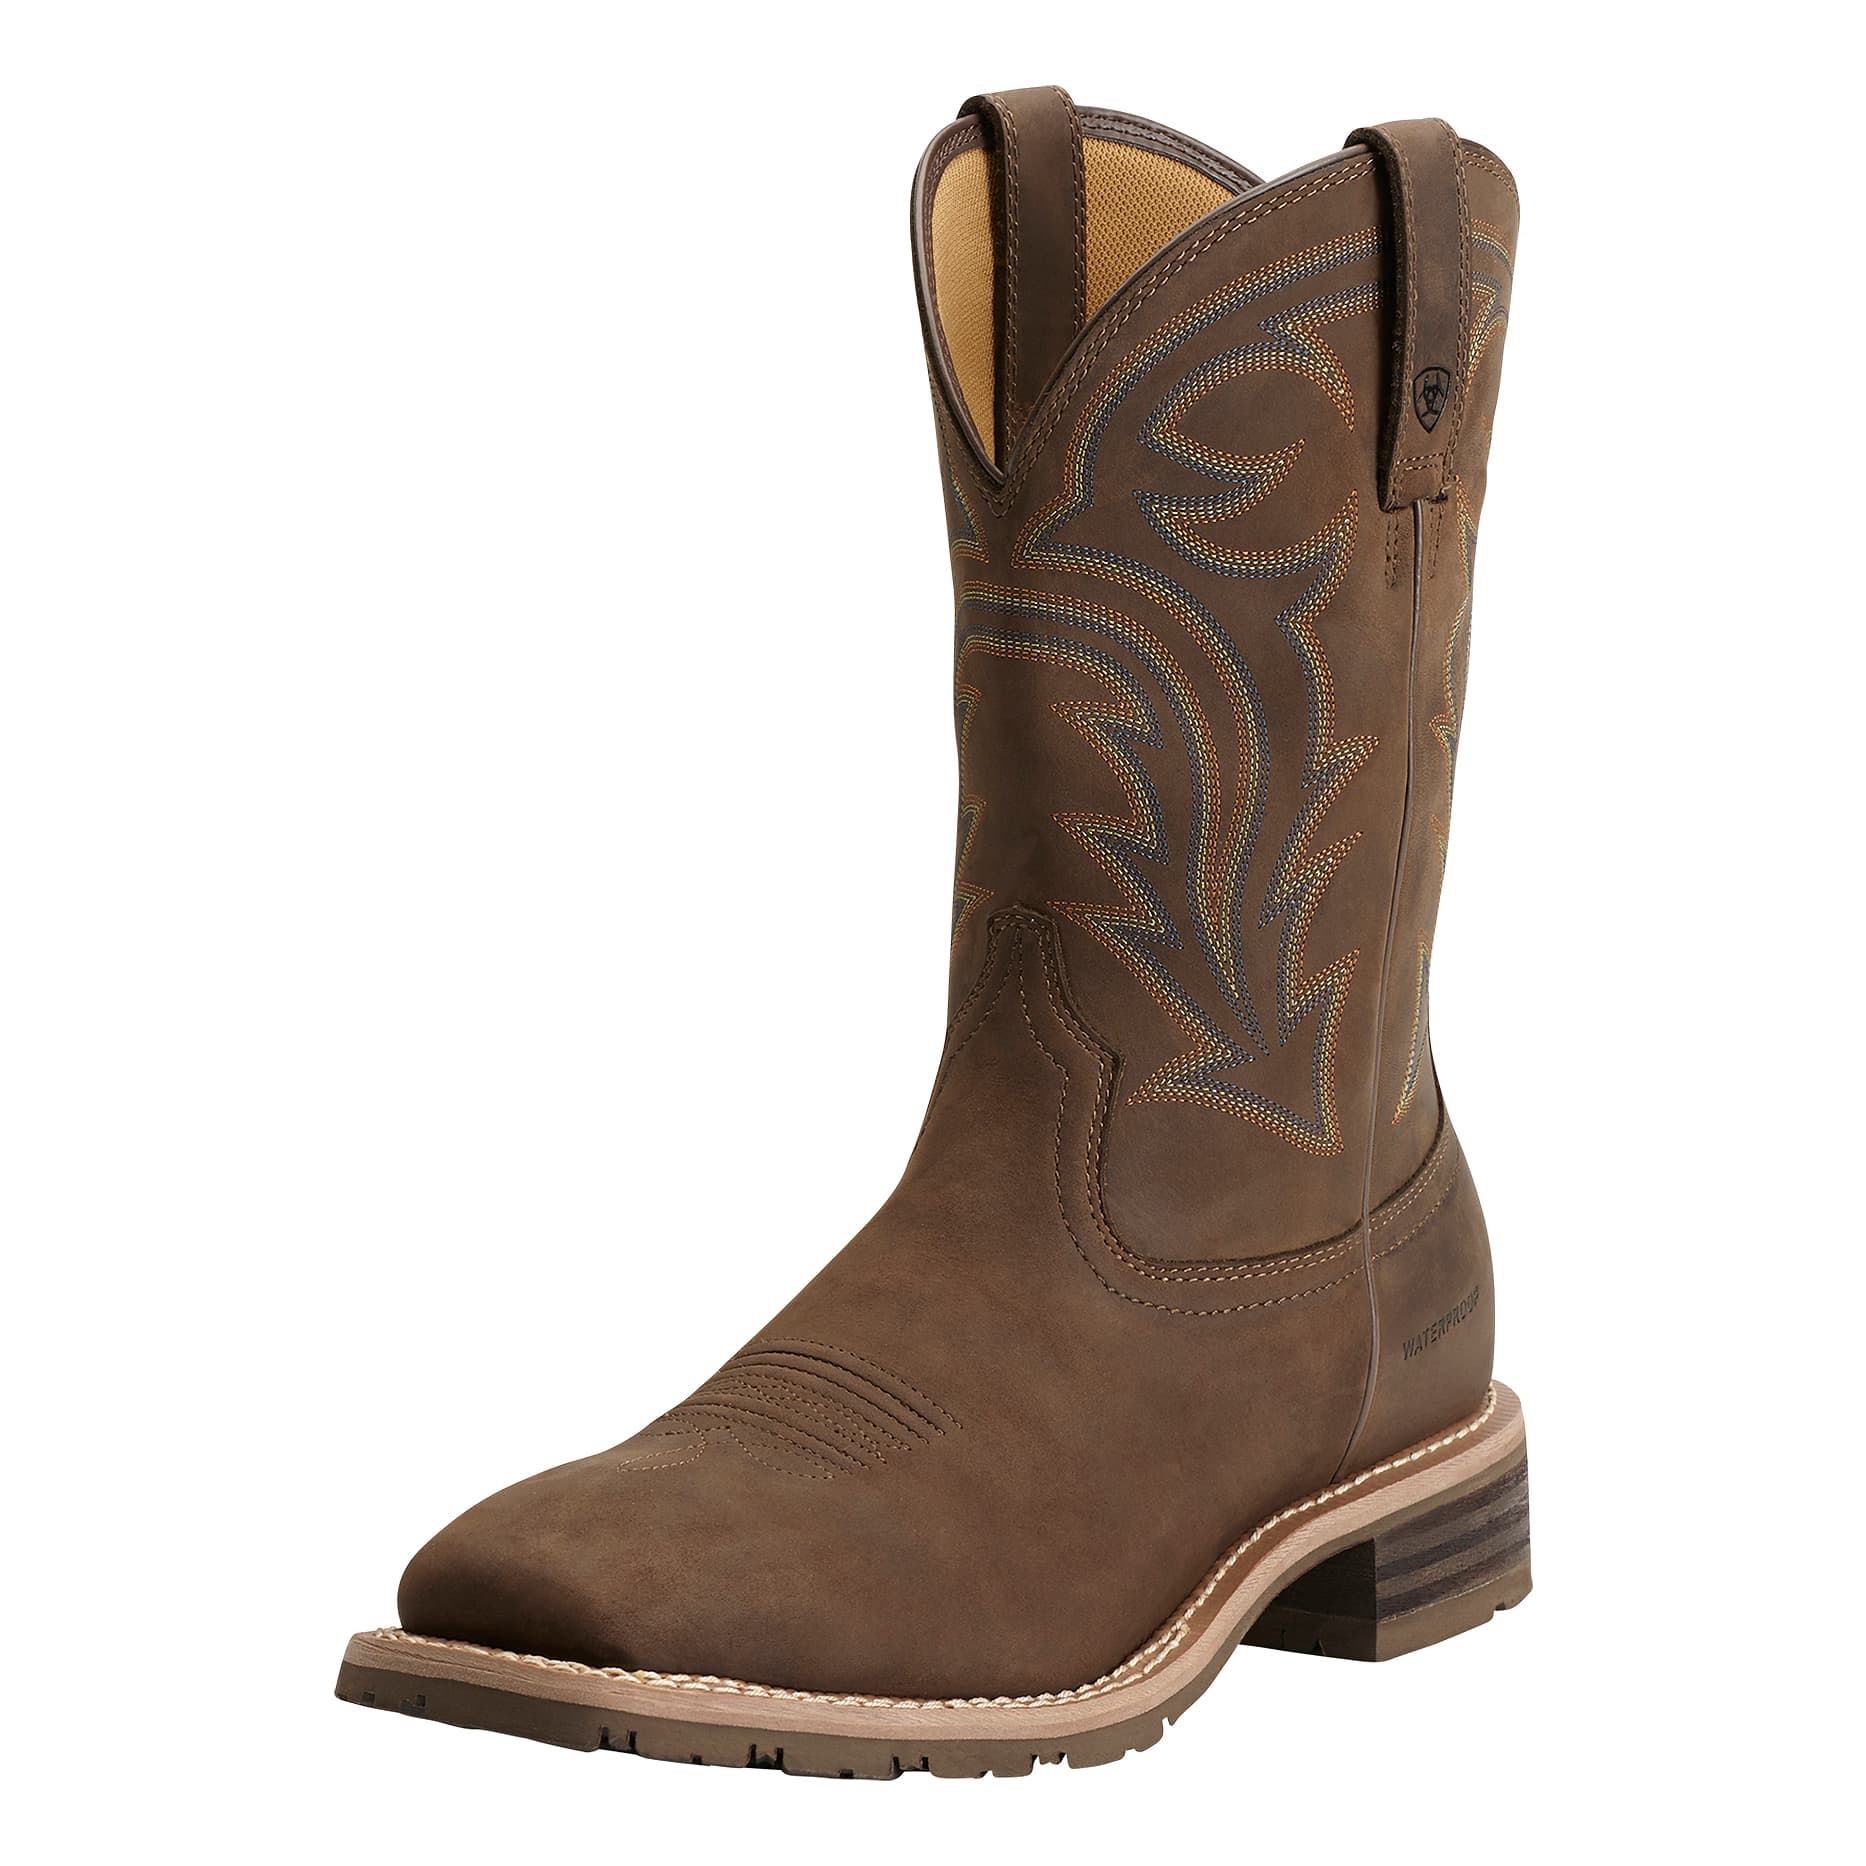 Ariat Sport Rustler Western Boots at Tractor Supply Co.